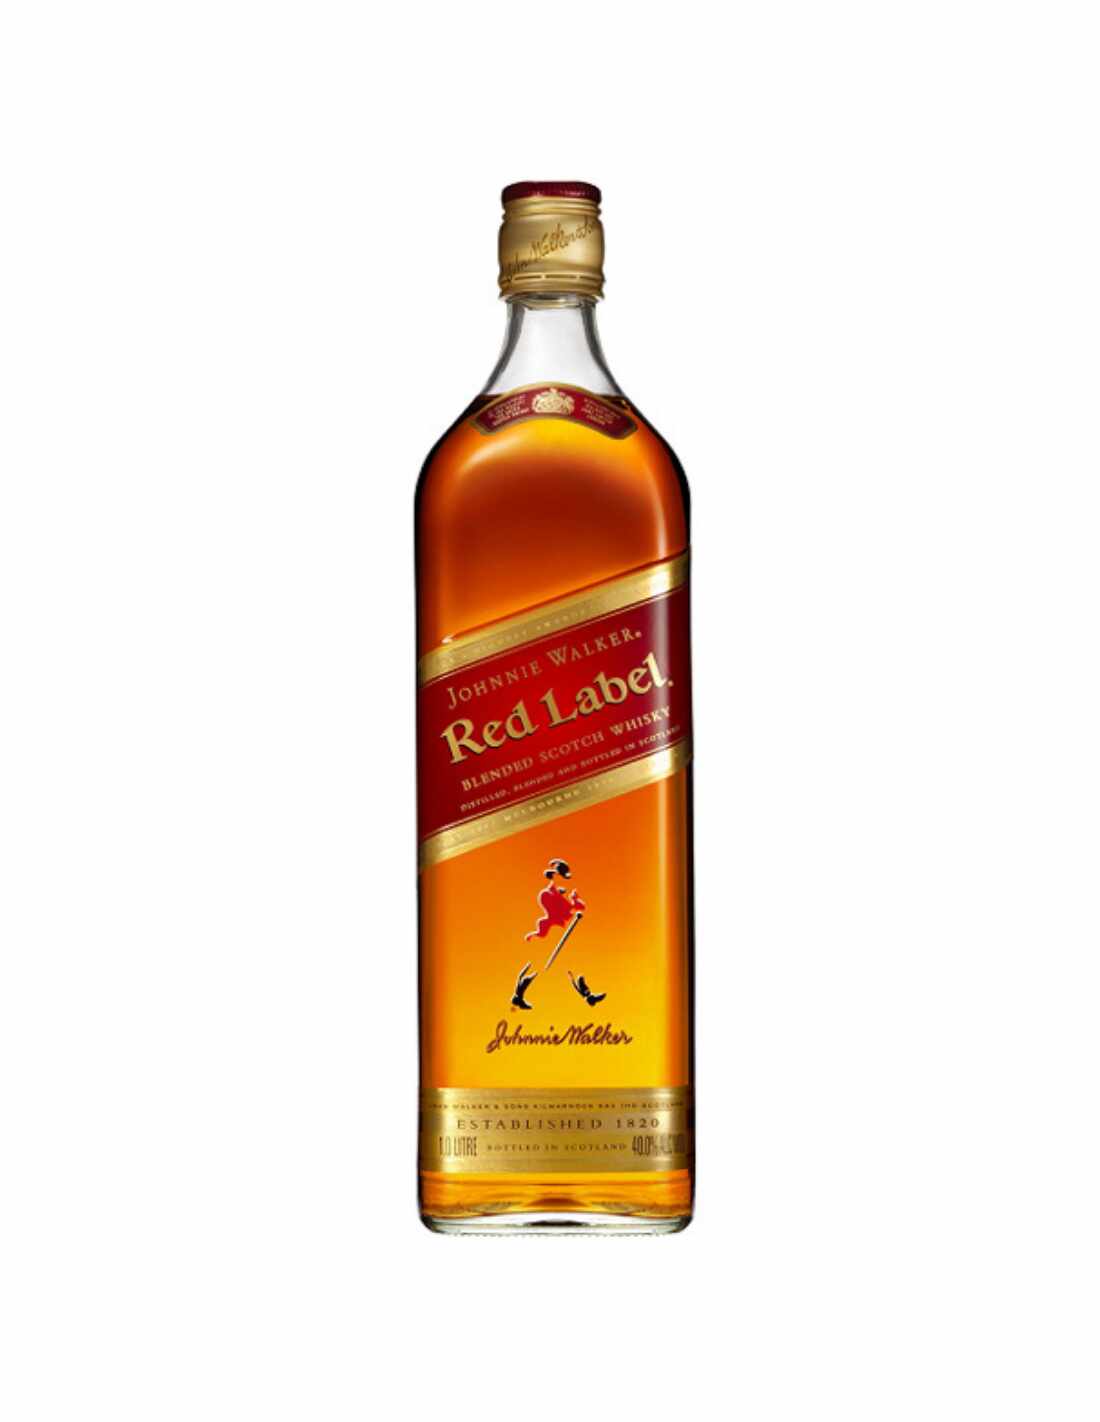 Whisky Johnnie Walker Red Label, 0.7L, 40% alc., Scotia